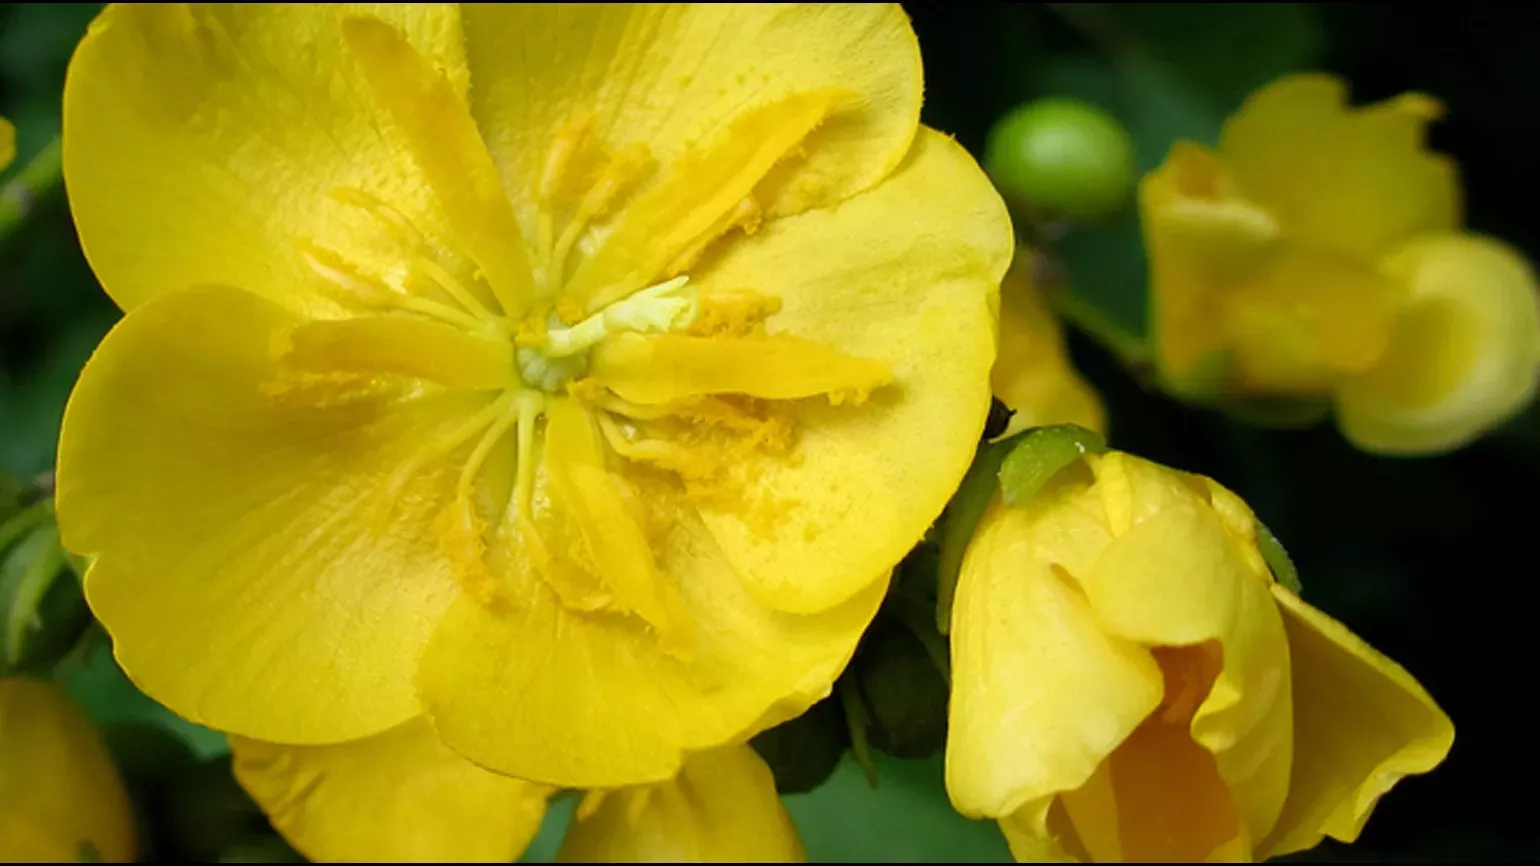 Close up of a yellow flower